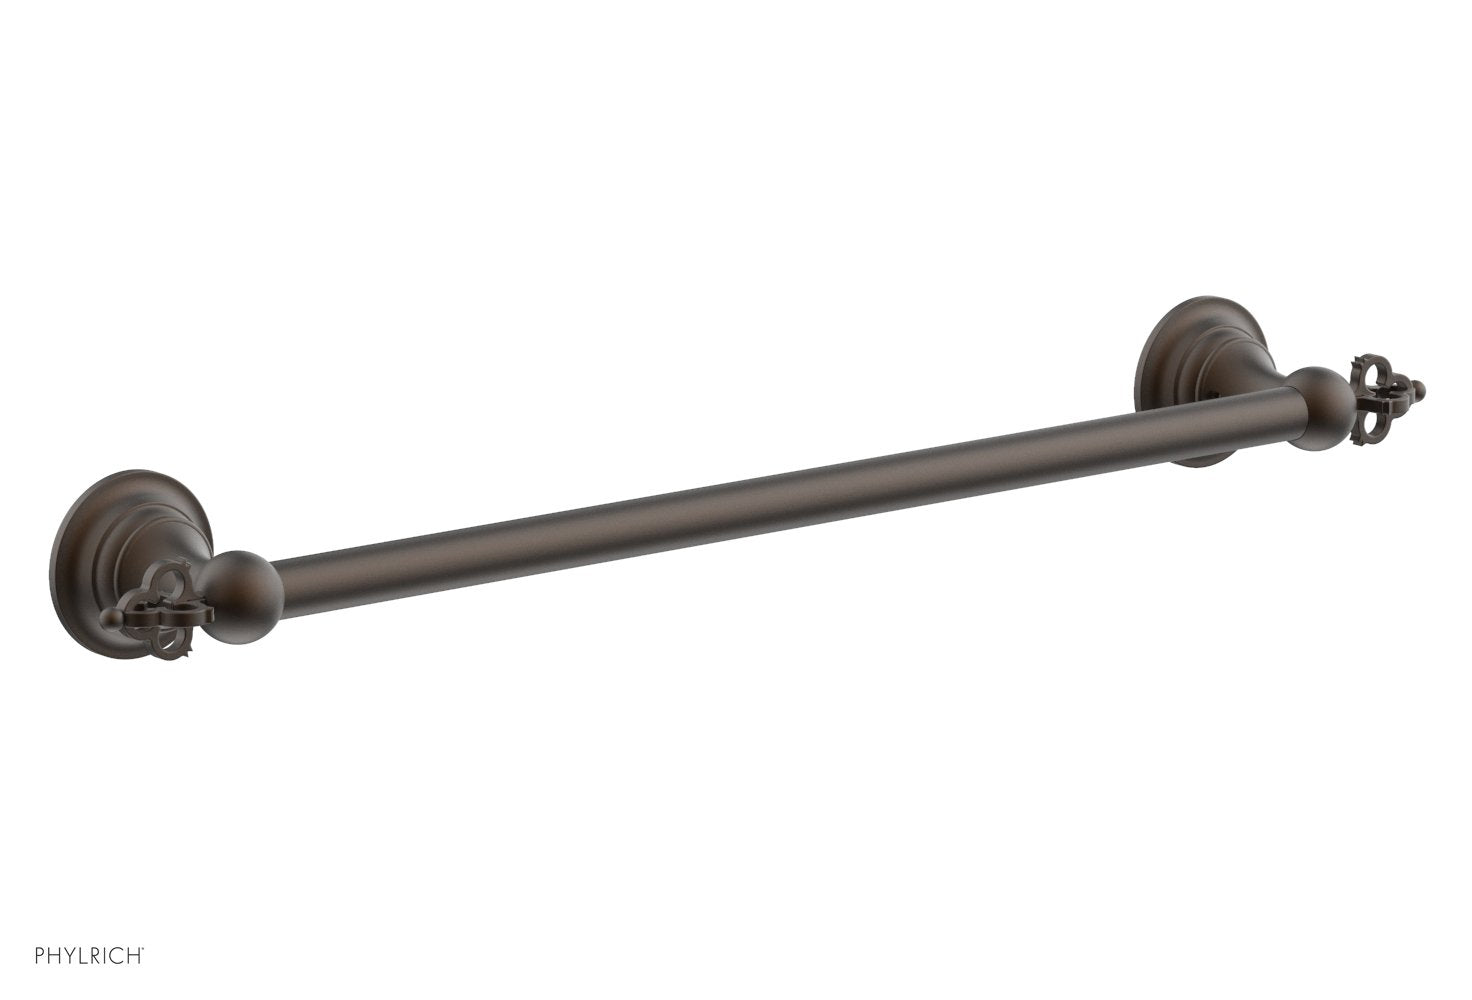 Phylrich COURONNE Towel Bar